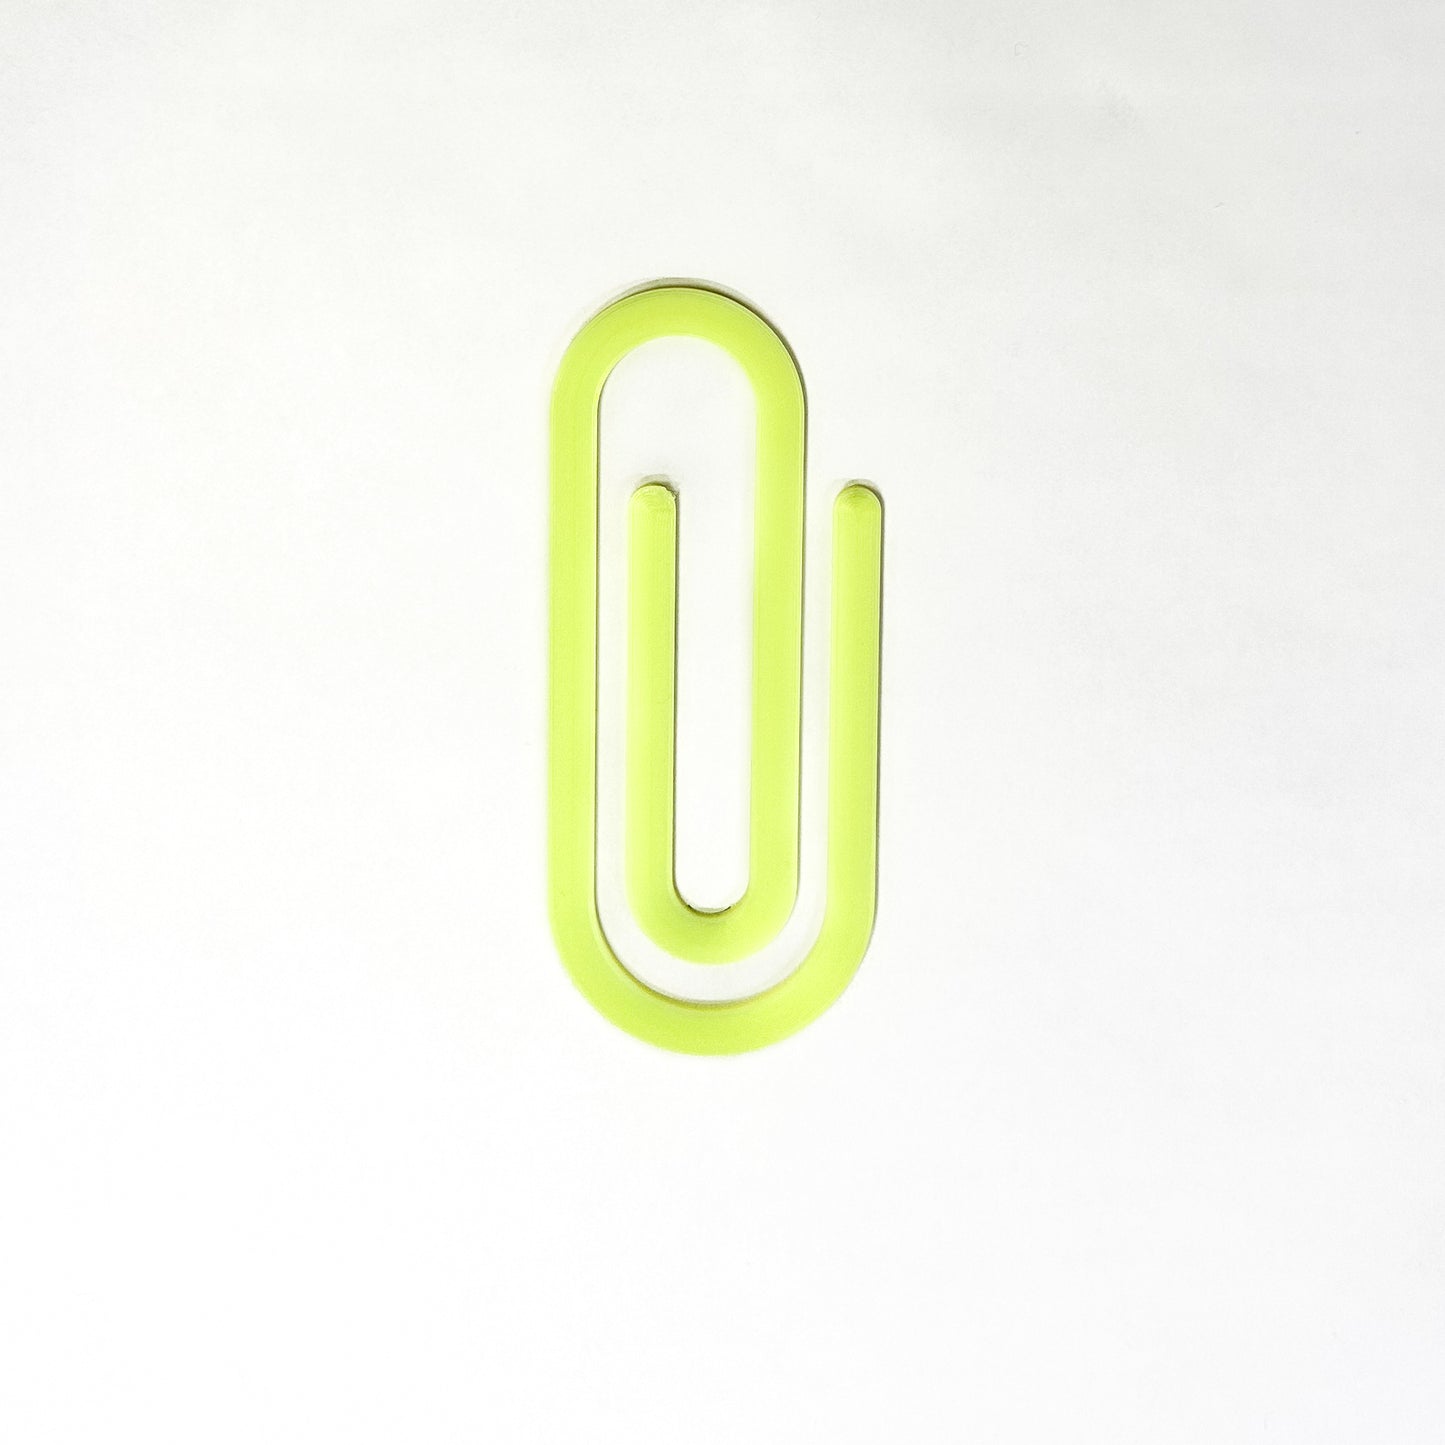 Giant Paperclip Bookmark